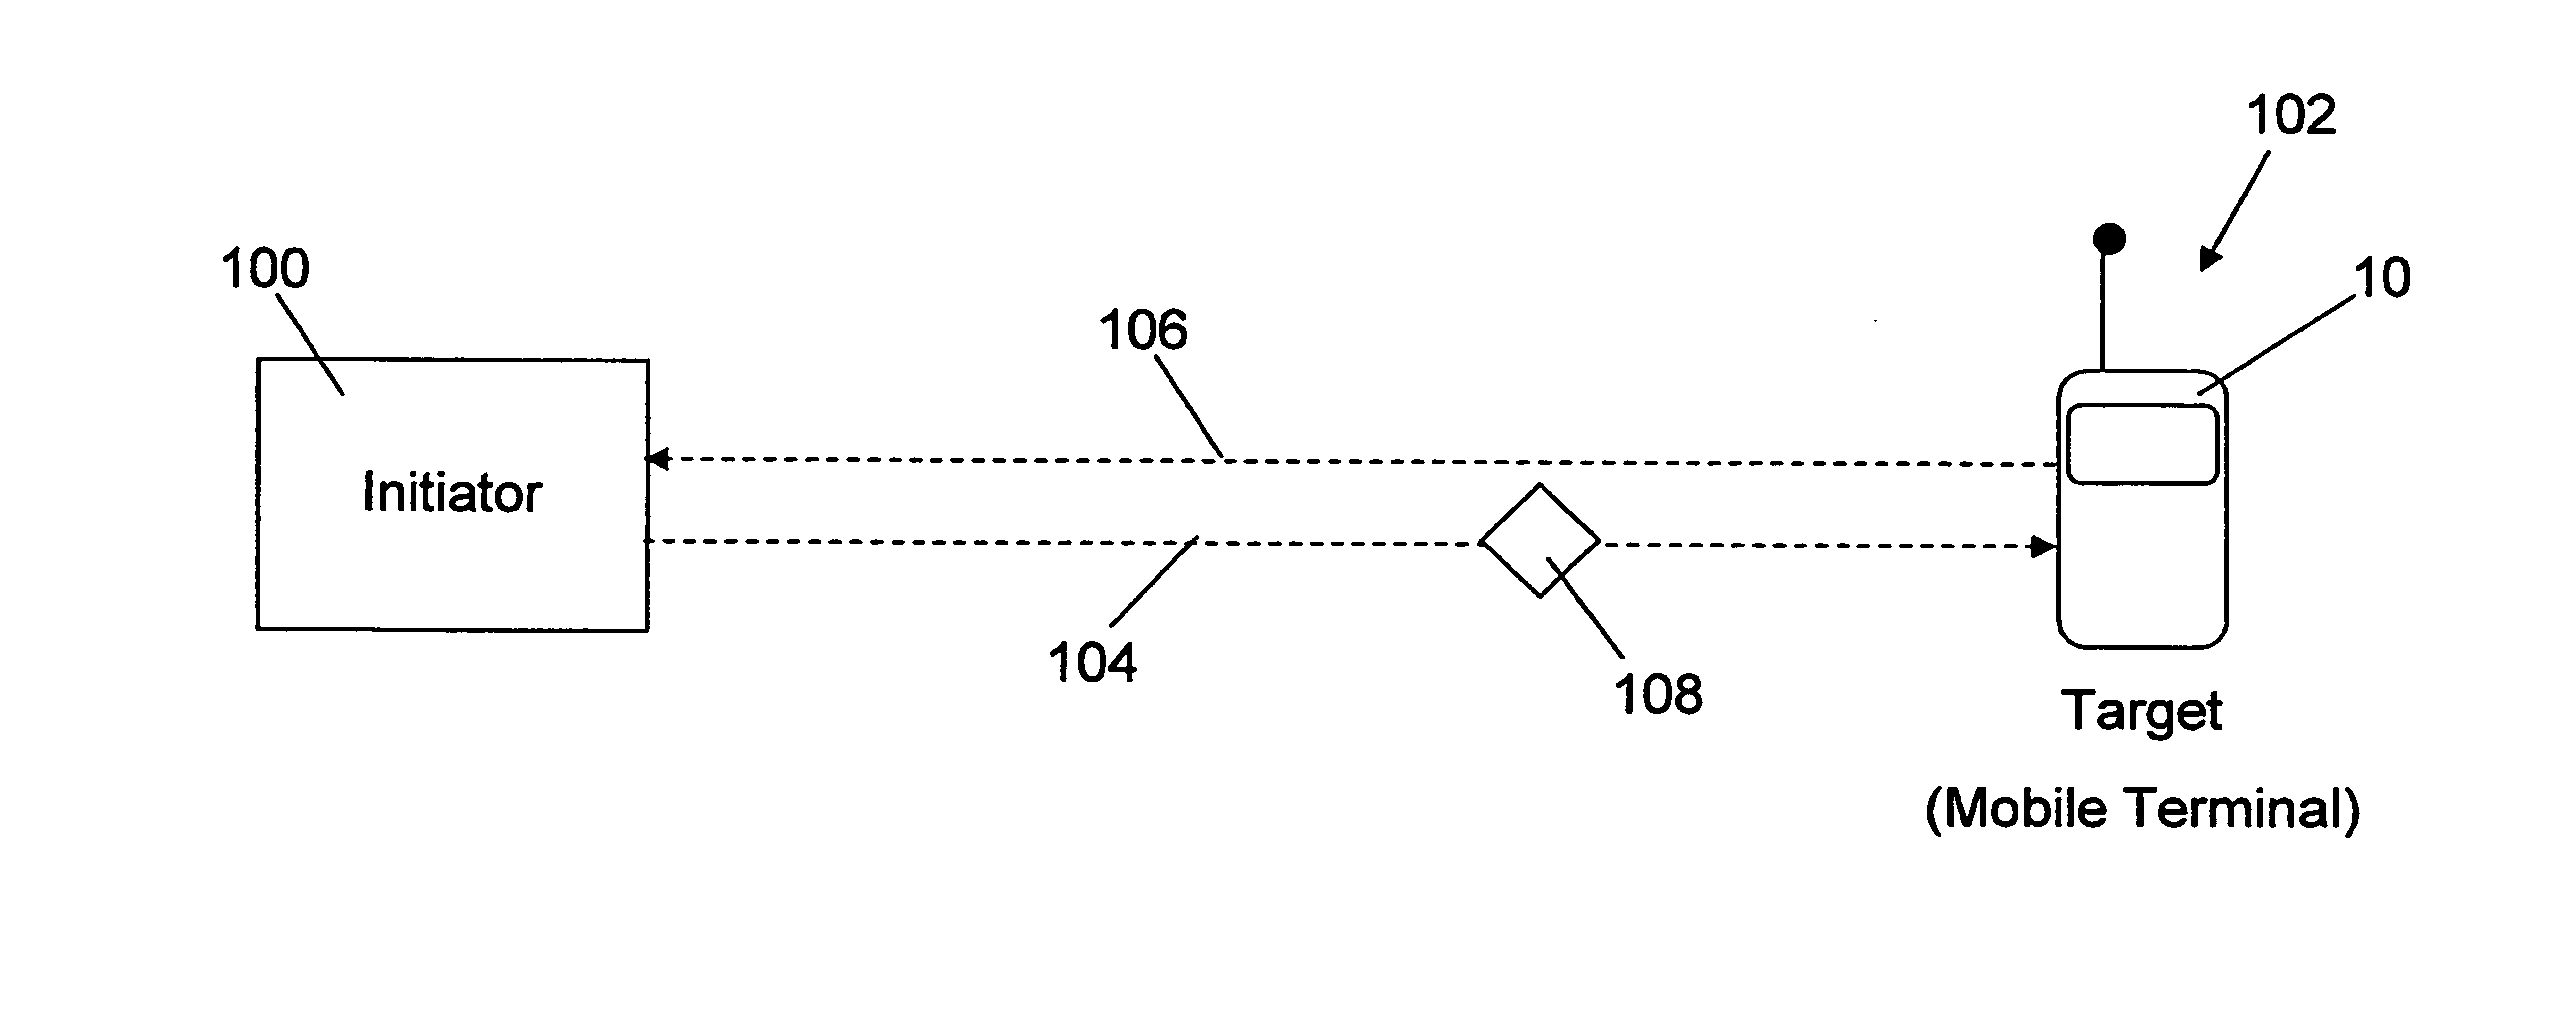 Apparatuses and methods for facilitating communication of devices